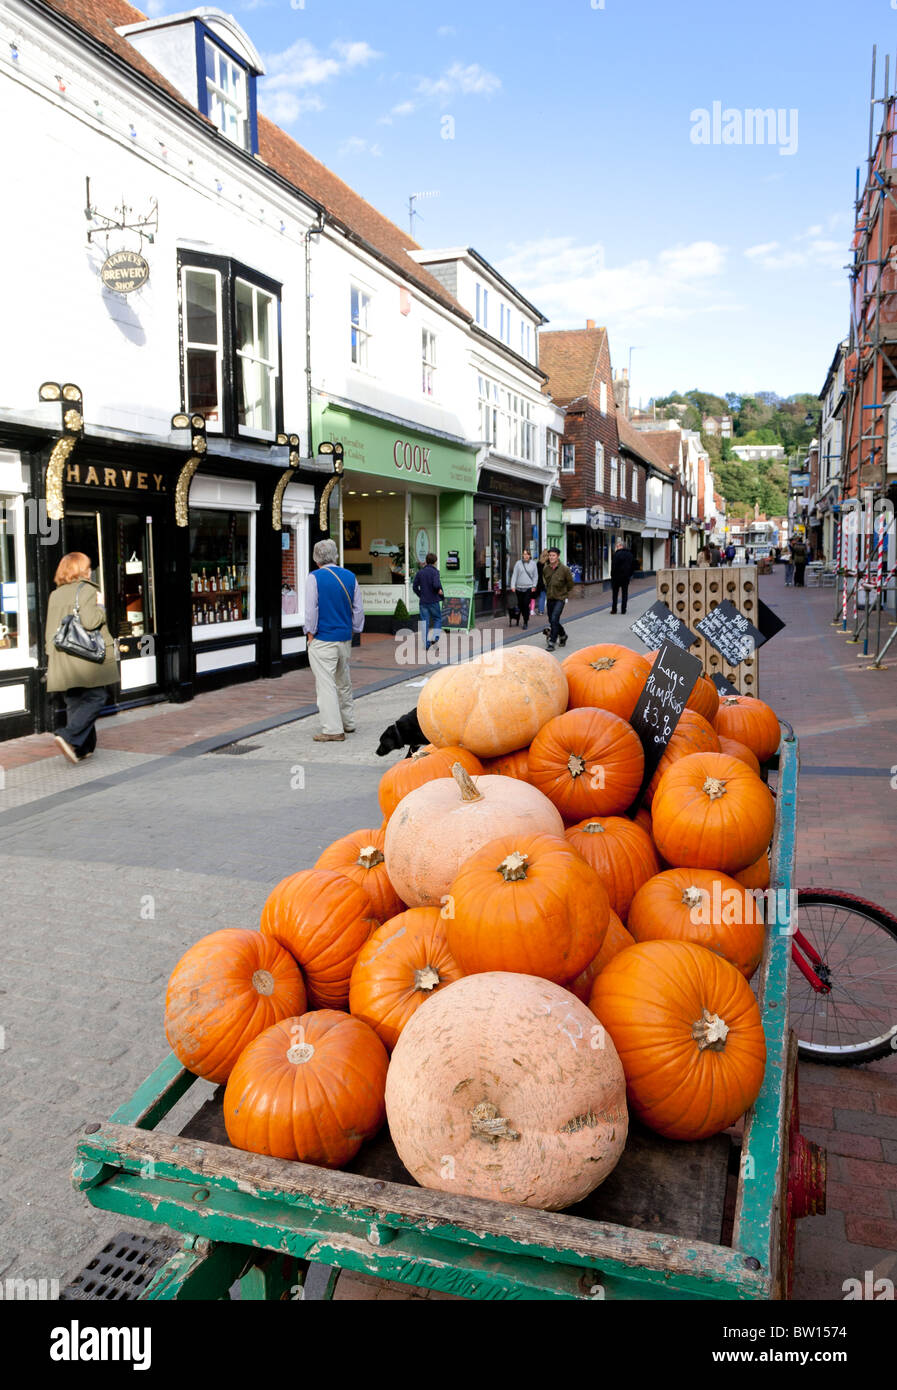 Street scene in Cliffe High Street Lewes, Sussex in Autumn with pumpkins on display Stock Photo